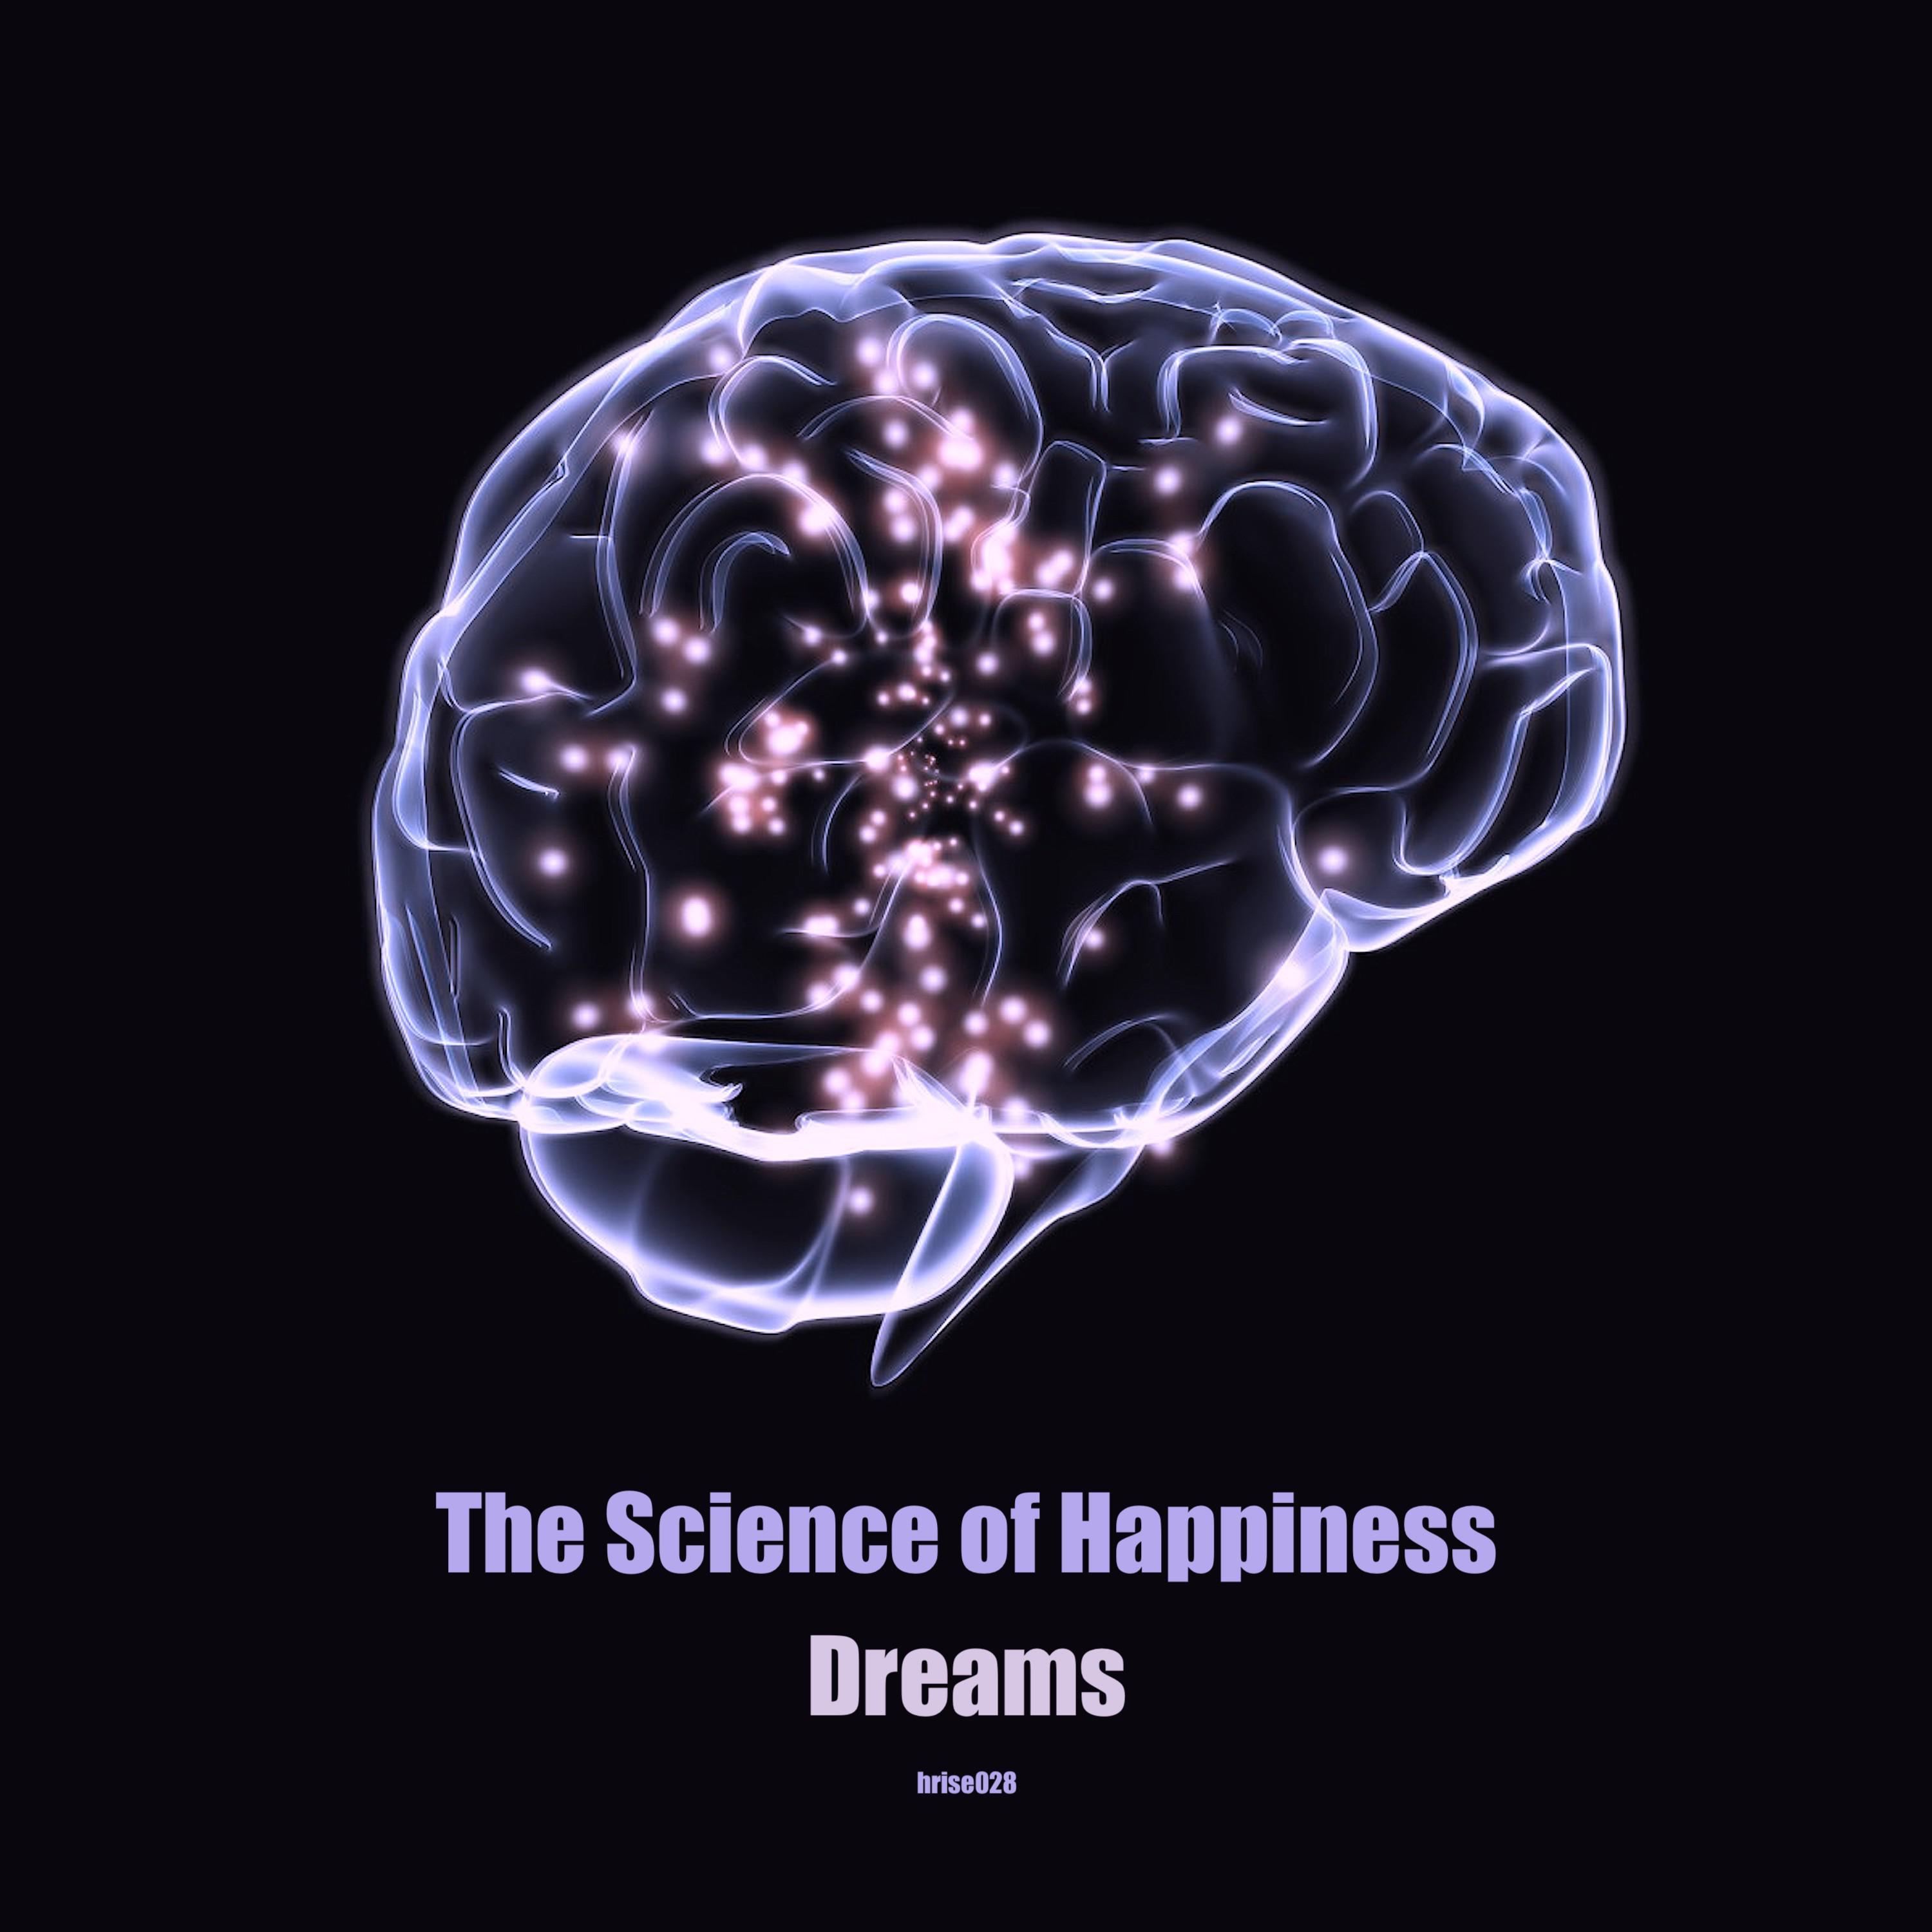 A Science of Happiness / Dreams